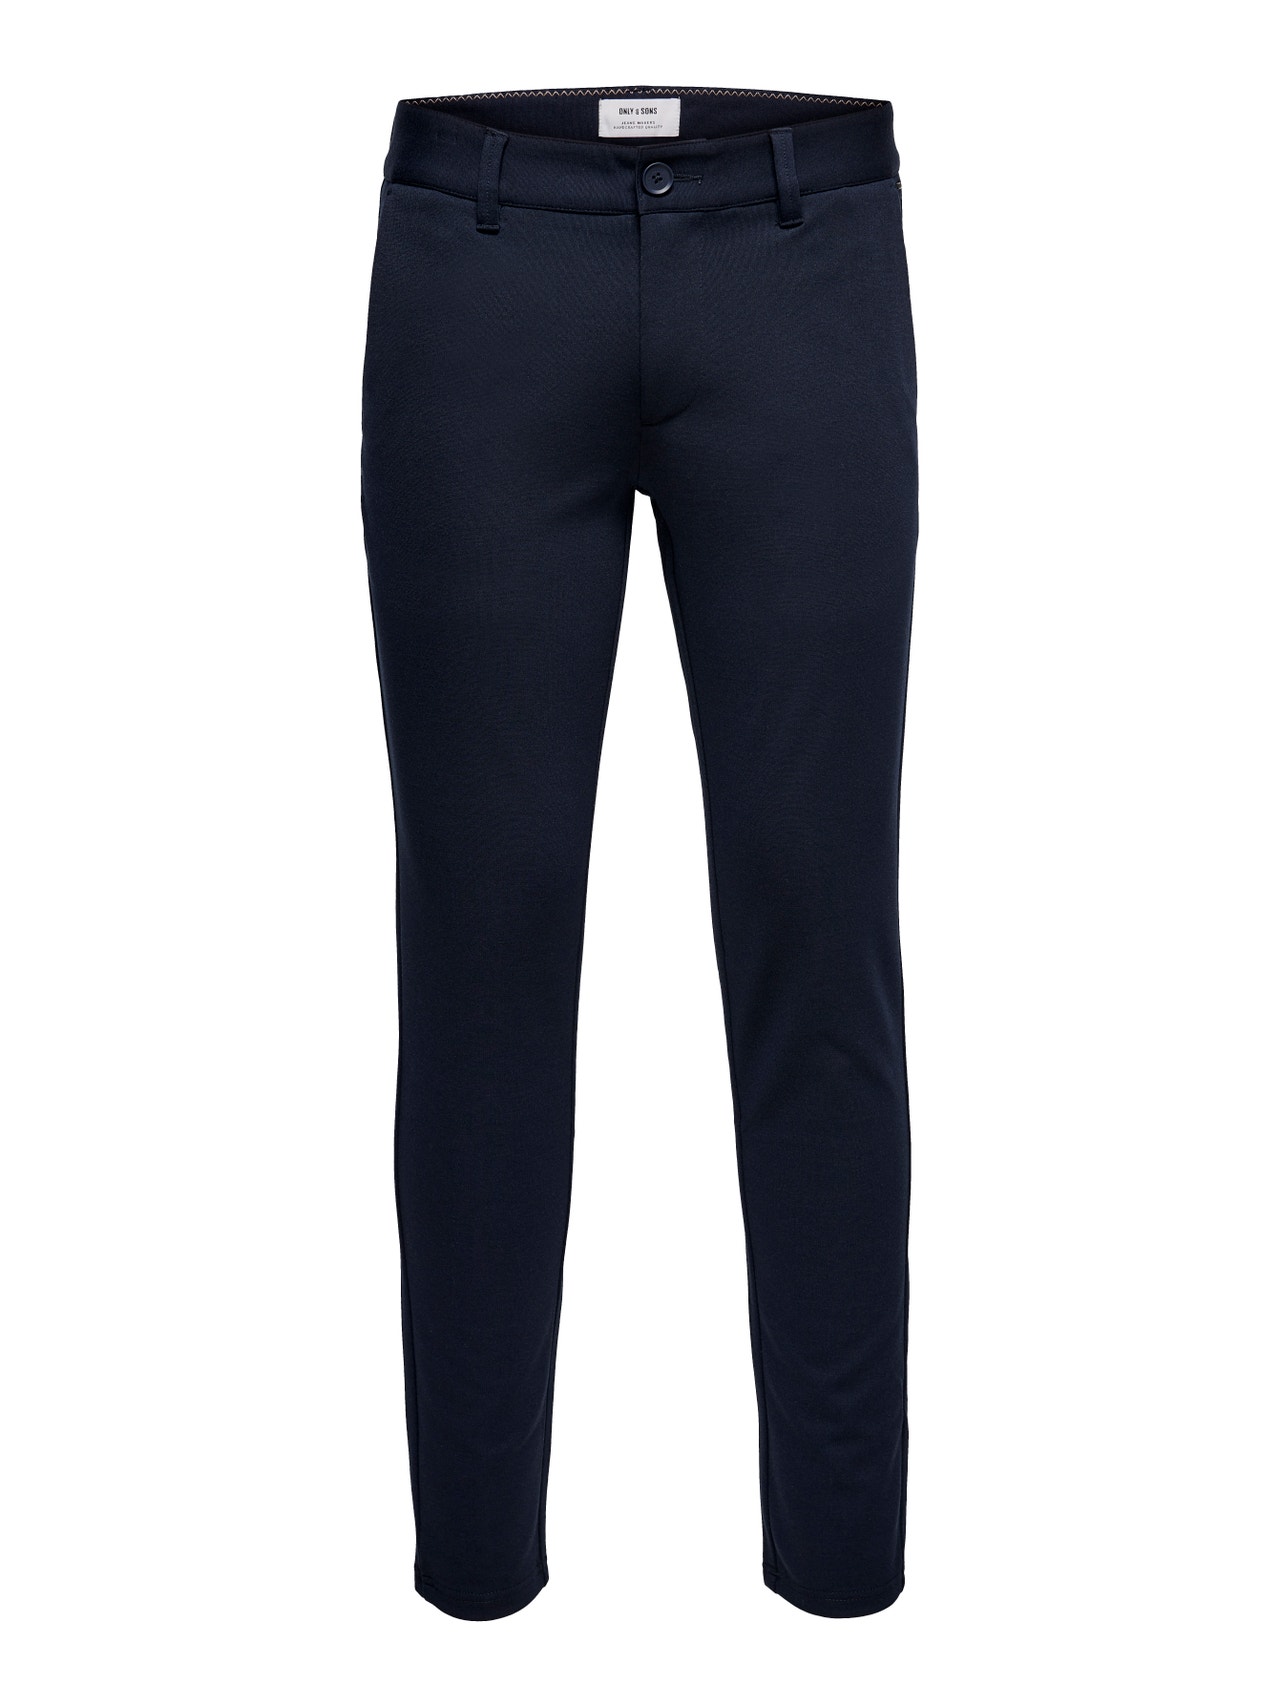 Solid colored chinos | Dark Blue | ONLY & SONS®